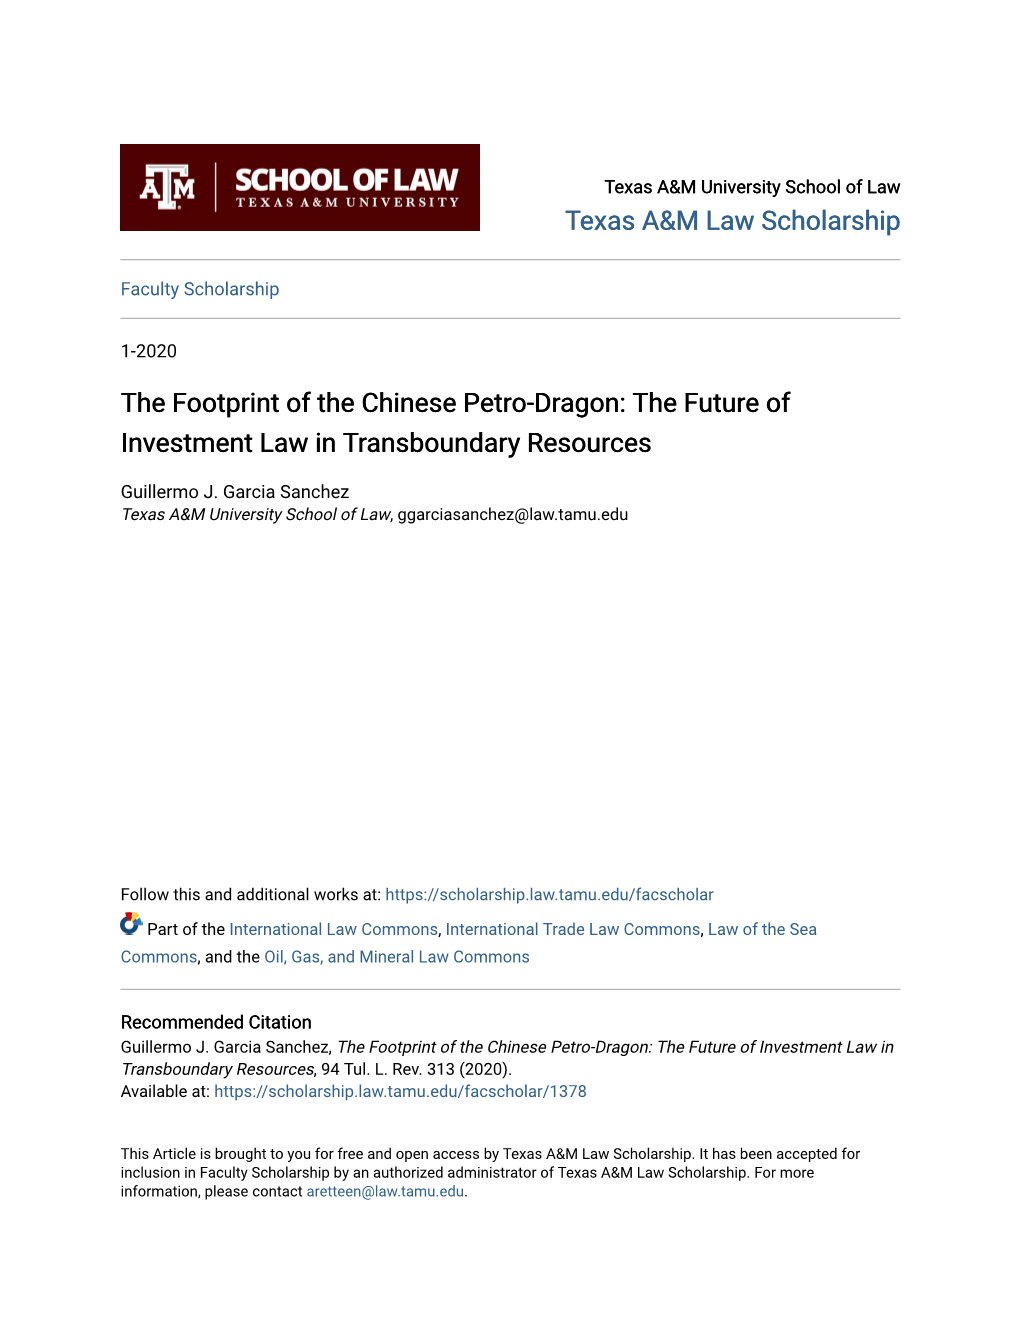 The Footprint of the Chinese Petro-Dragon: the Future of Investment Law in Transboundary Resources